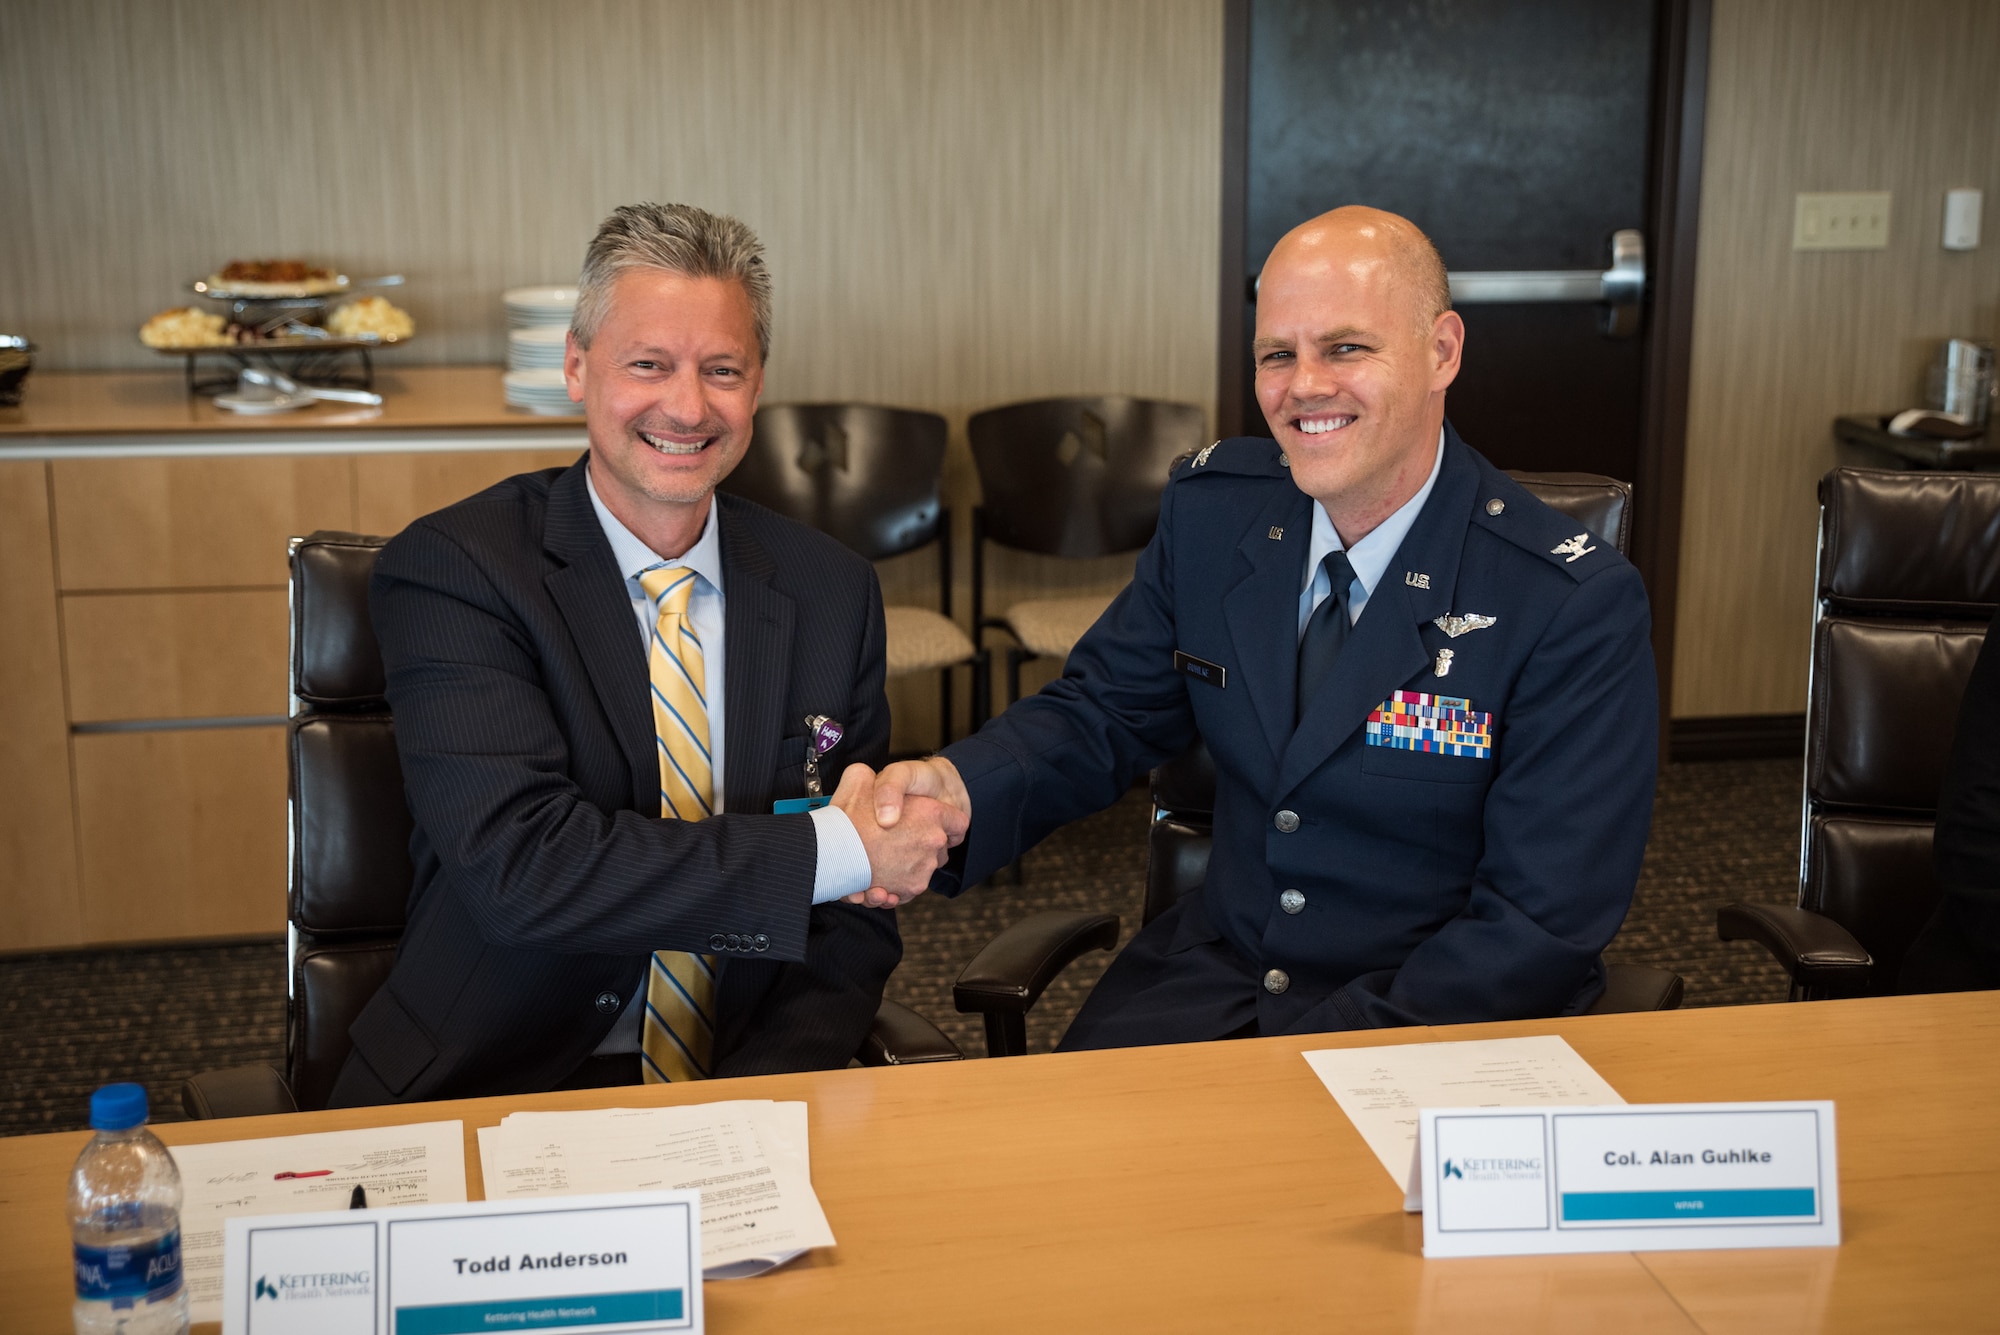 Todd Anderson, executive vice president for Kettering Health Network, and Col. (Dr.) Alan Guhlke, chair, En route Care Training Department at USAFSAM, shake hands after signing a training affiliation agreement July 15 authorizing medical personnel from the USAFSAM to partner together with Kettering Health Network to enhance the readiness of Air Force medical service personnel. (U.S. Air Force photo/Richard Eldridge)